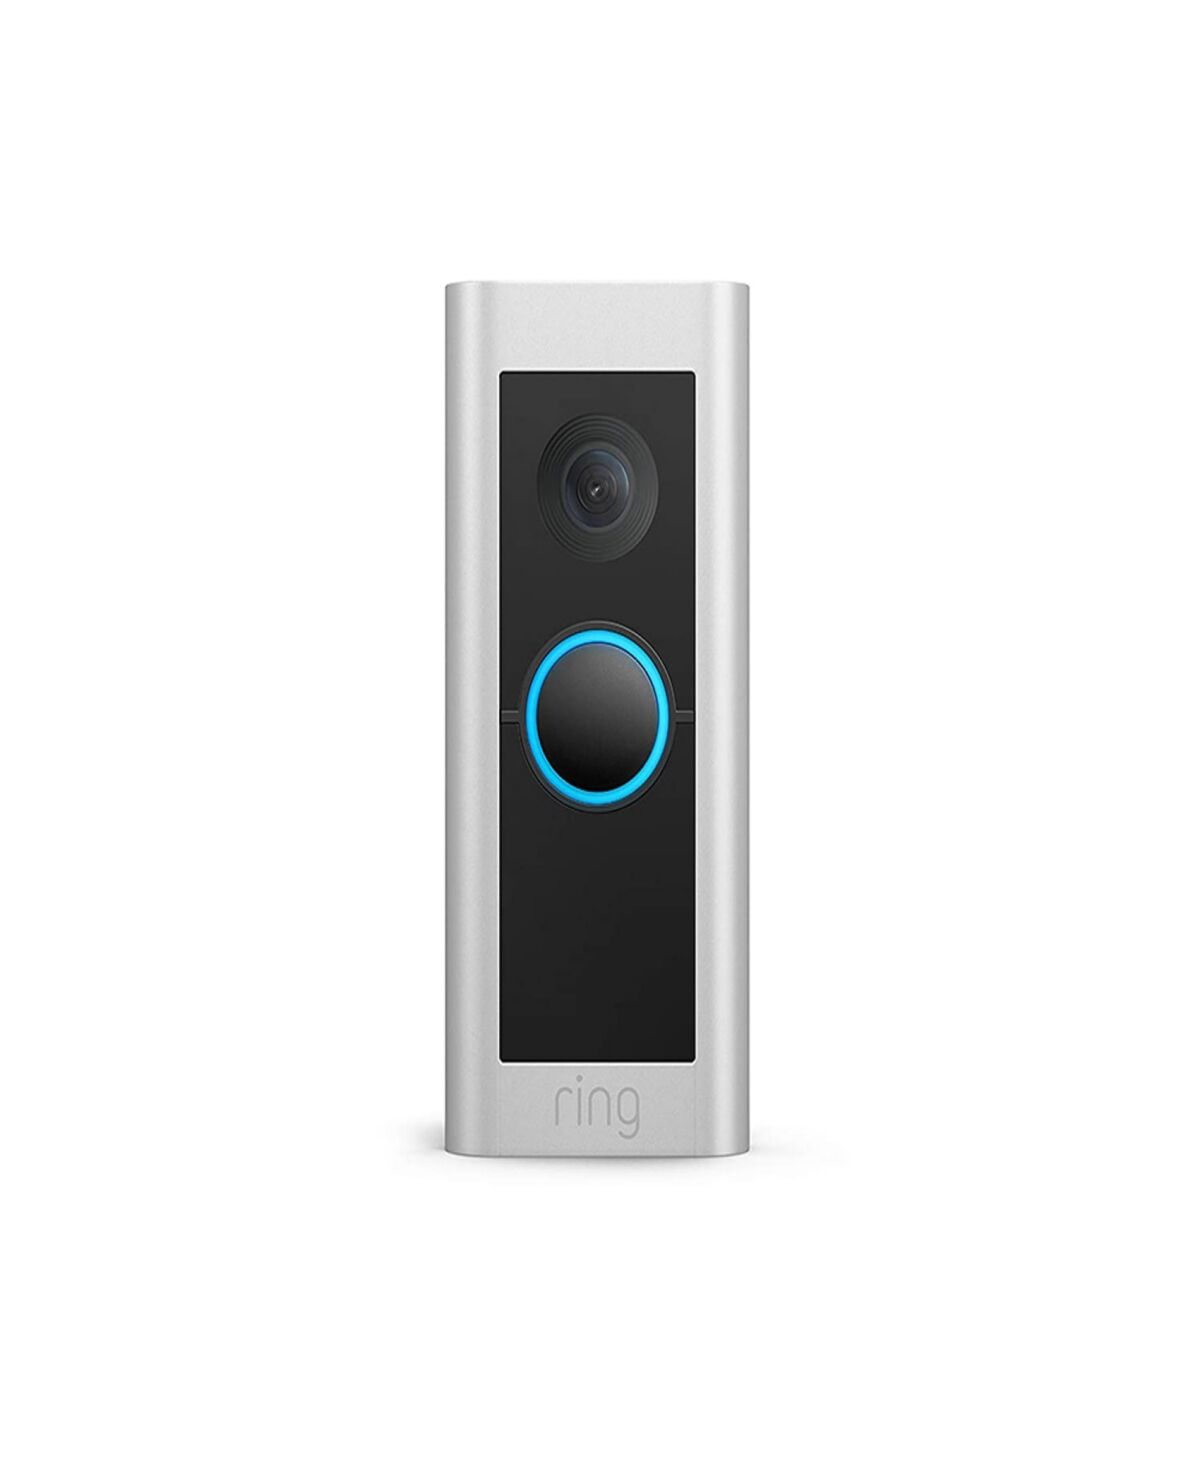 ring Wired Doorbell Pro 2 in Satin Nickel - Silver